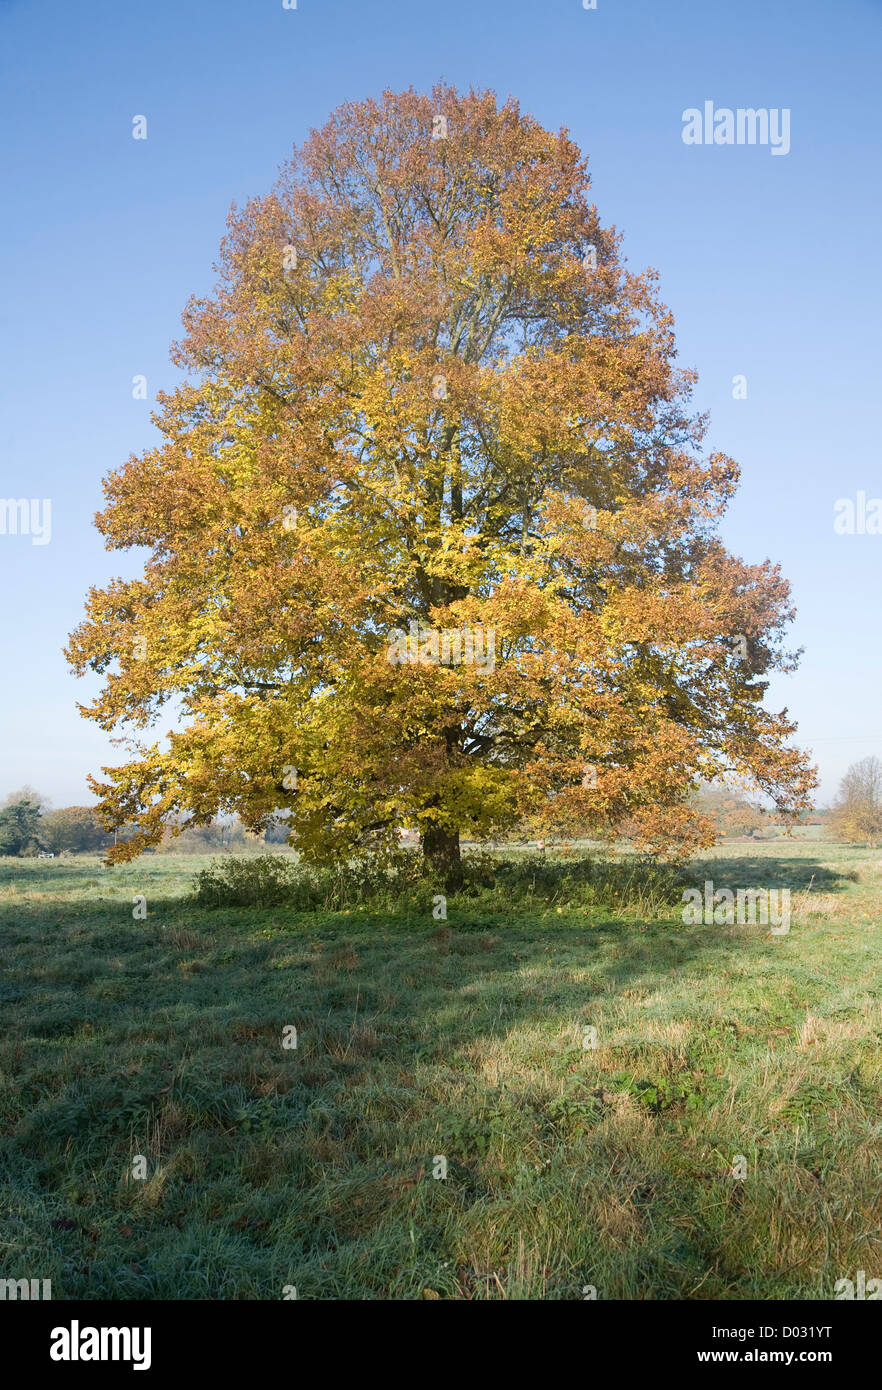 Small leaved lime tree autumn leaf colours standing in field, Sutton, Suffolk, England Stock Photo